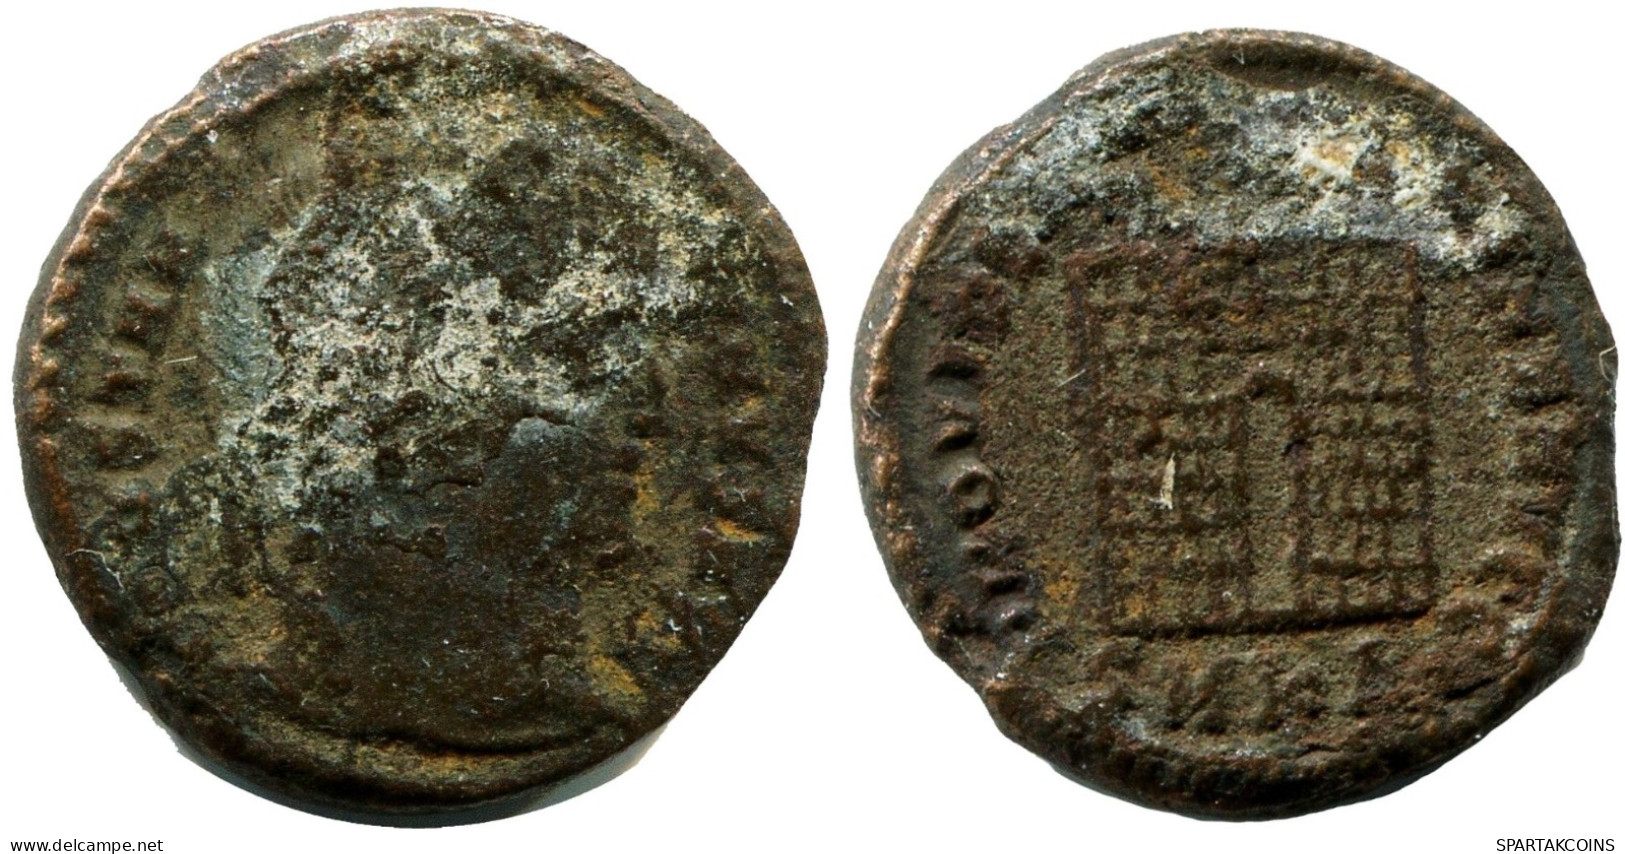 CONSTANTINE I MINTED IN CYZICUS FOUND IN IHNASYAH HOARD EGYPT #ANC11005.14.D.A - The Christian Empire (307 AD Tot 363 AD)